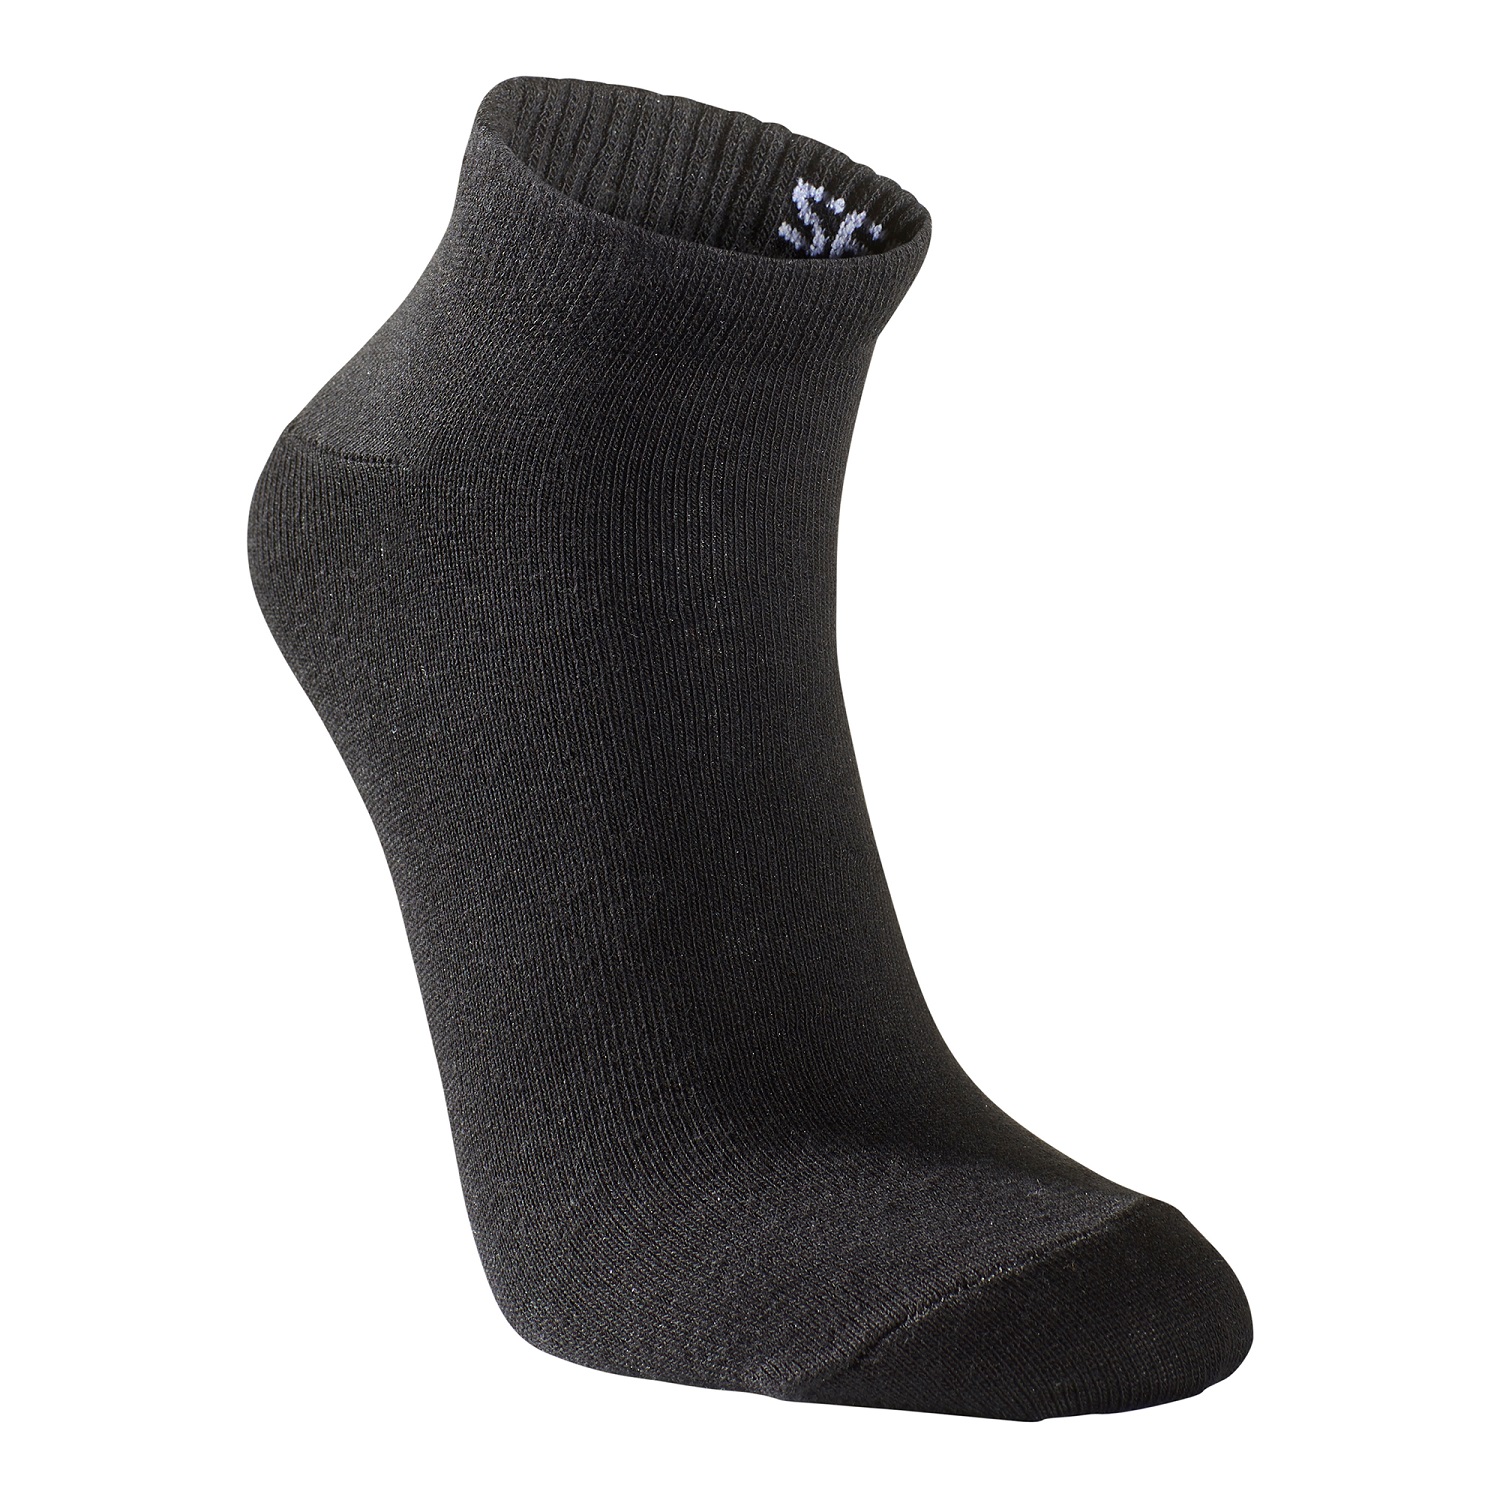 Seger Casual Cotton Low Shaft Socks 3pack